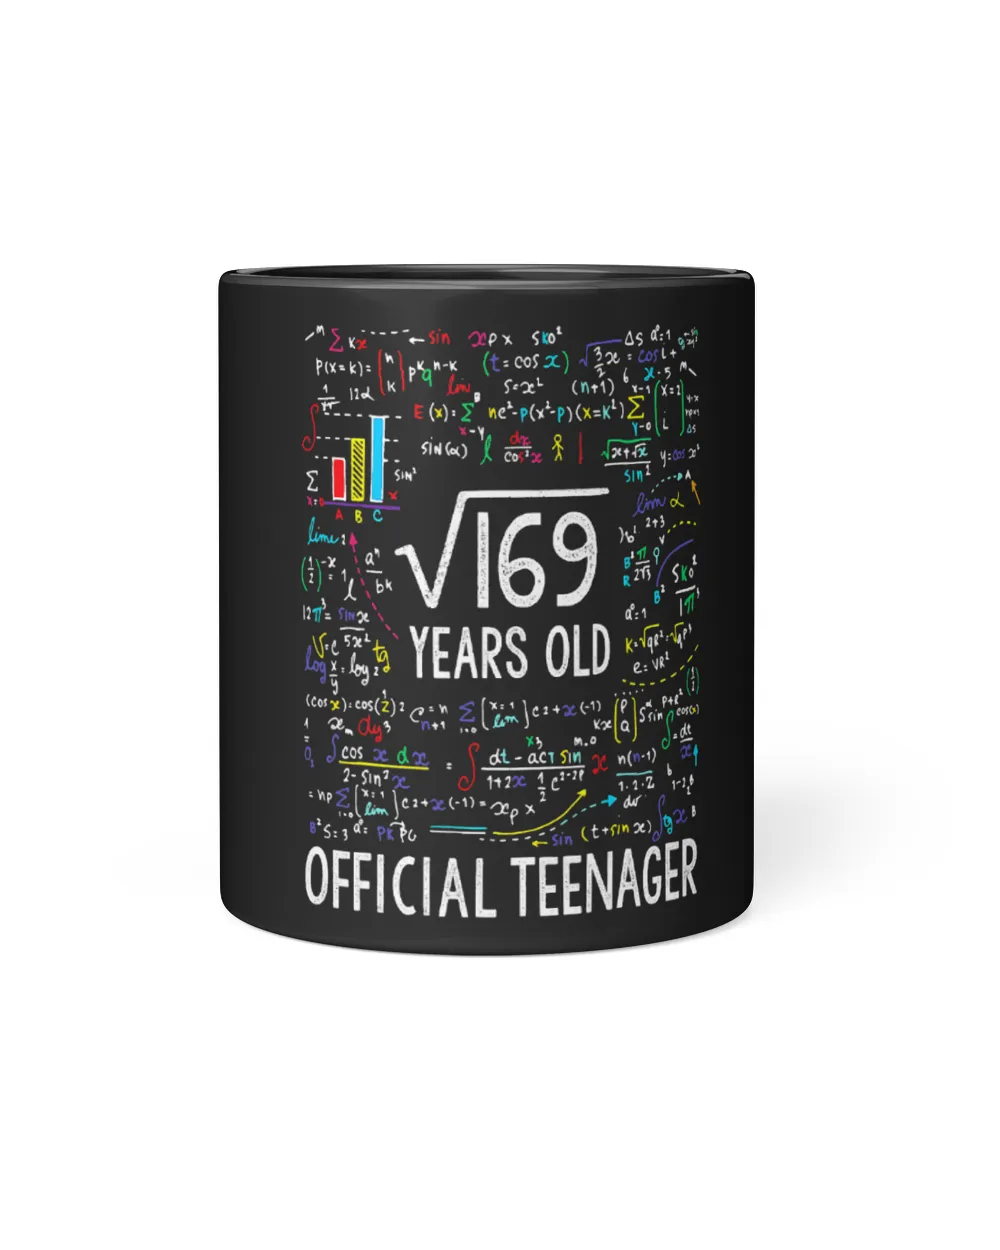 Square Root Of 169 13 Years Old Official Teenager Birthday